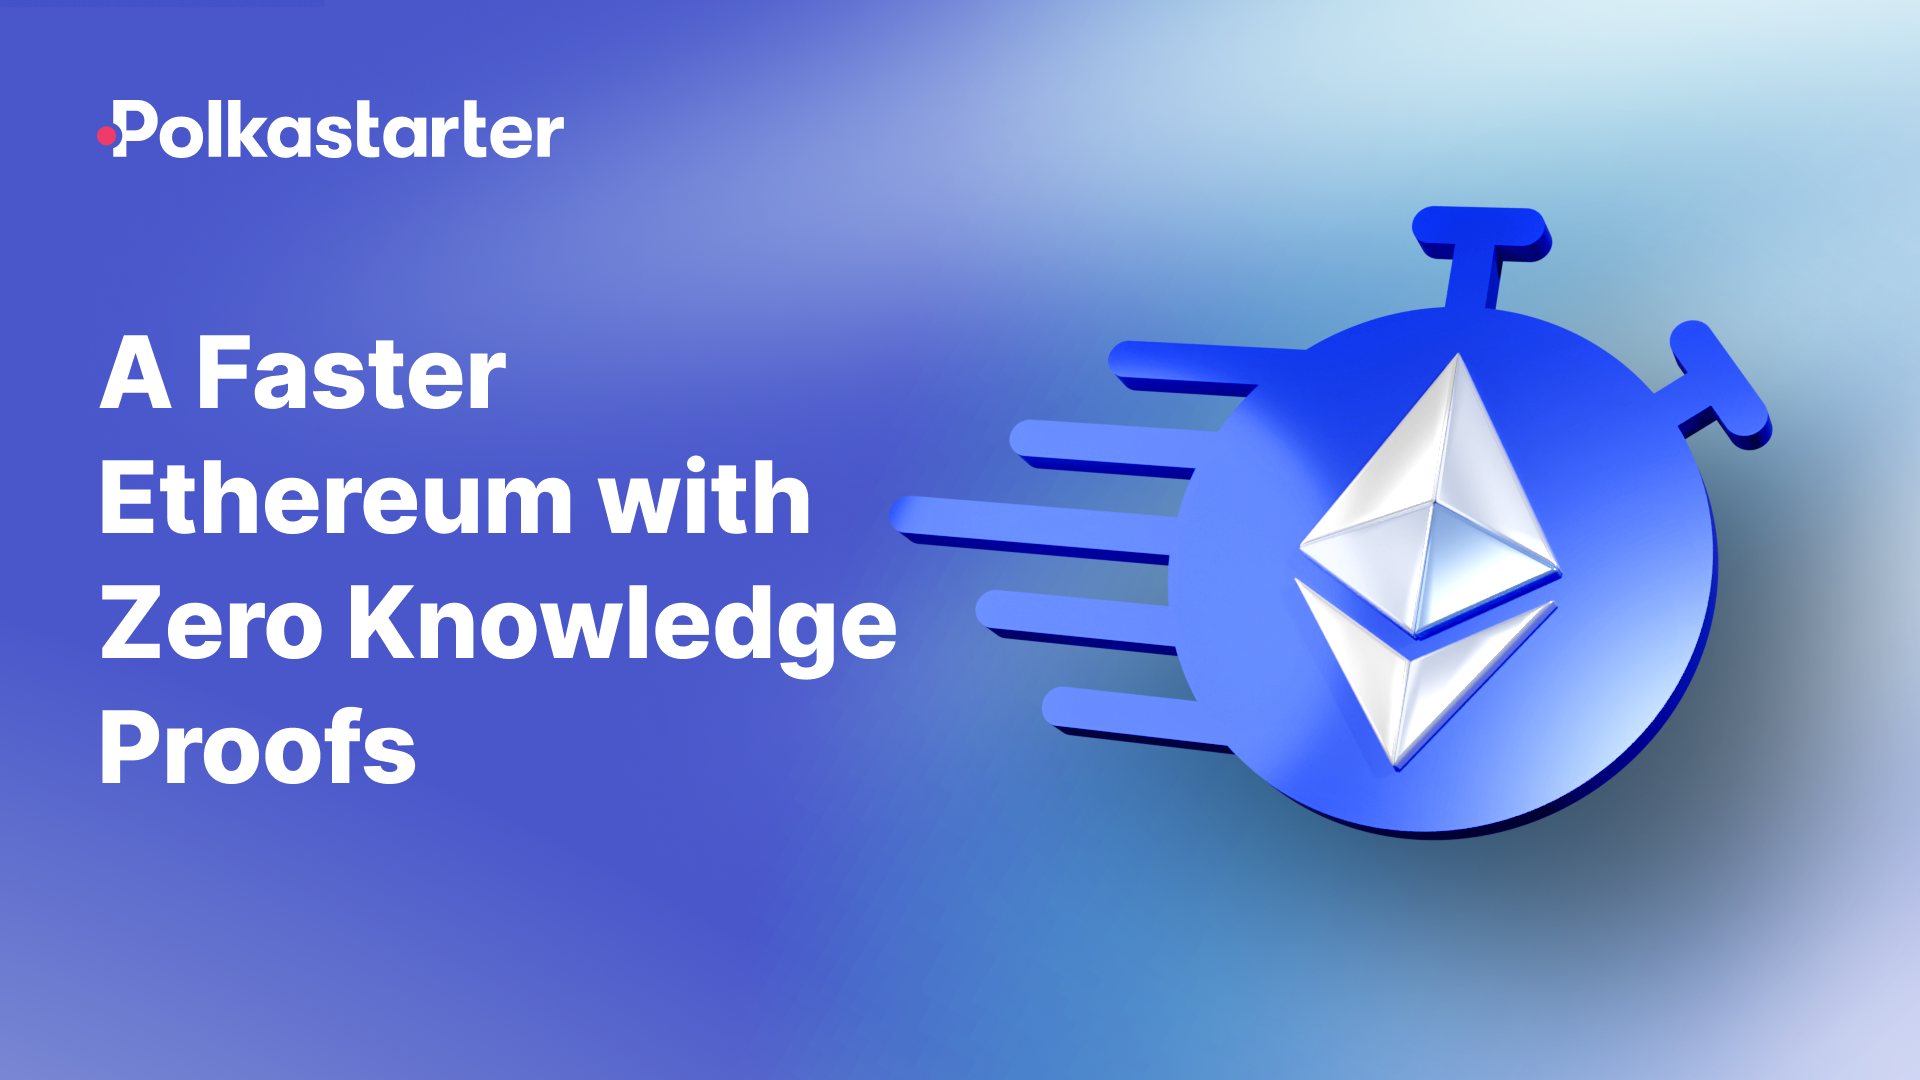 A Faster Ethereum with Zero Knowledge Proofs